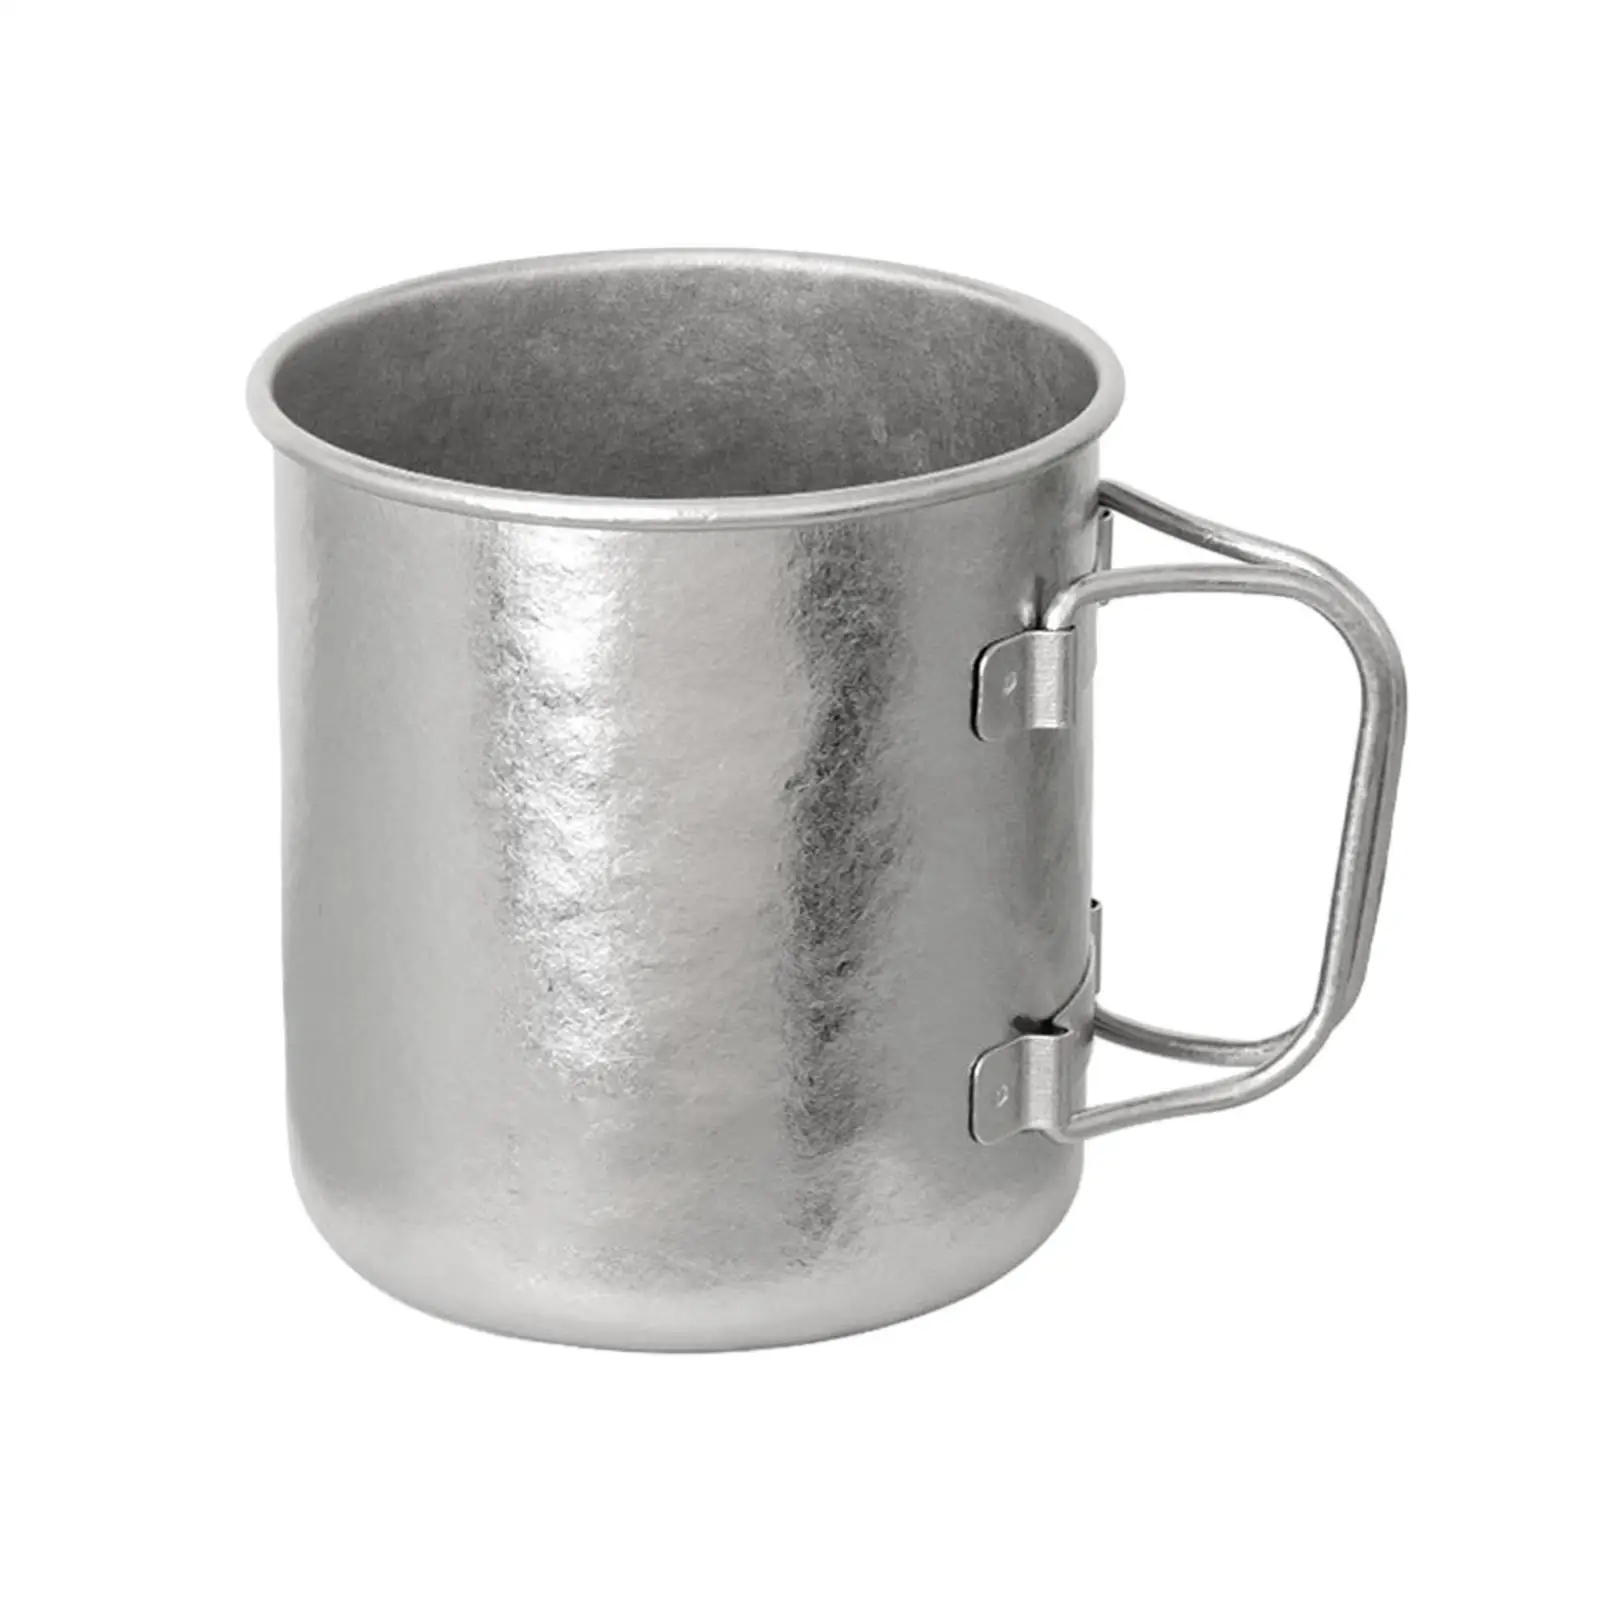 Titanium 450ml Cup Camping Mug Foldable Handle Water Cup for Touring Trips